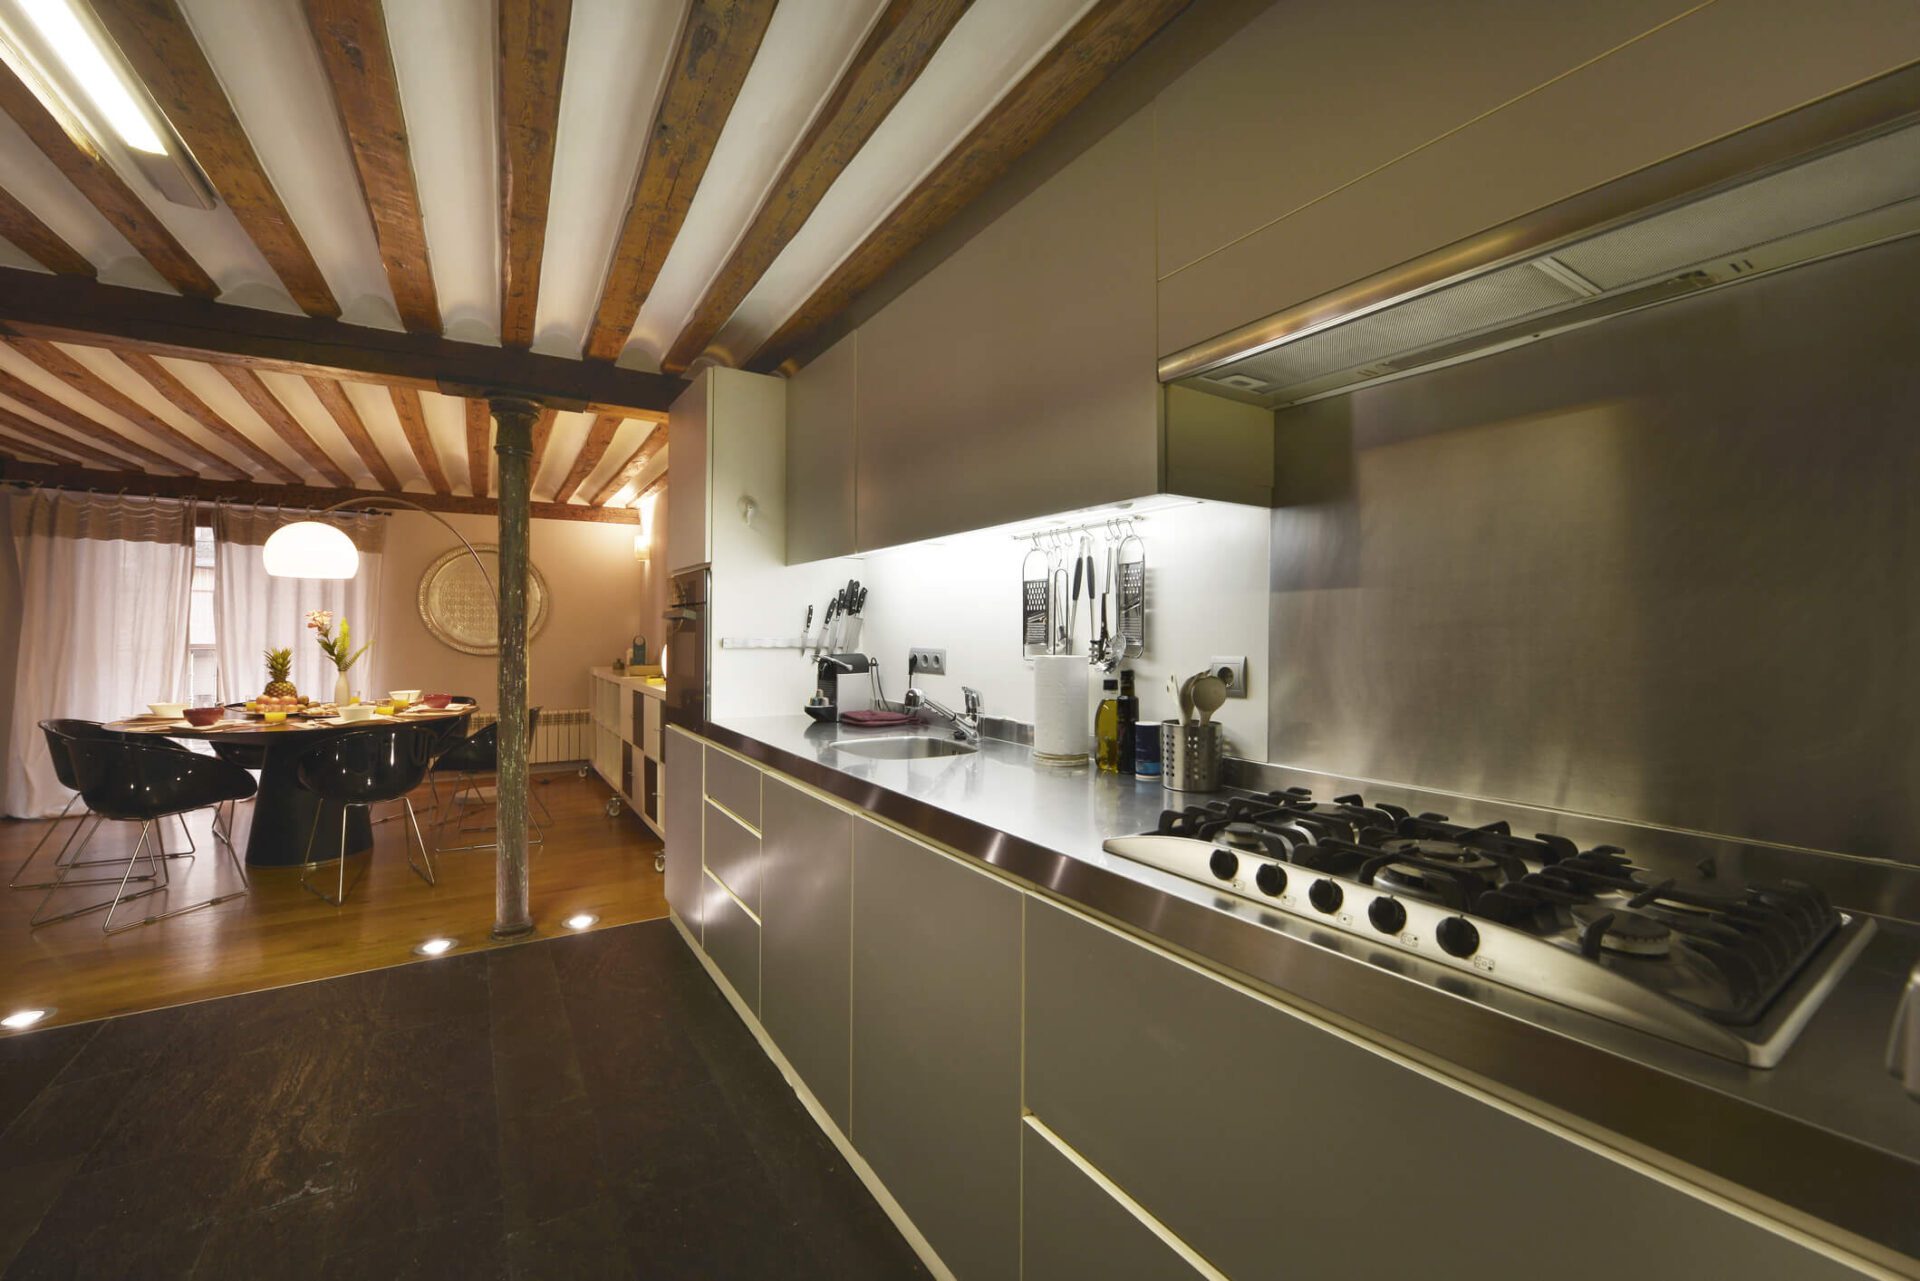 5 Creative Ways to Incorporate Stainless Steel into Your Home Design